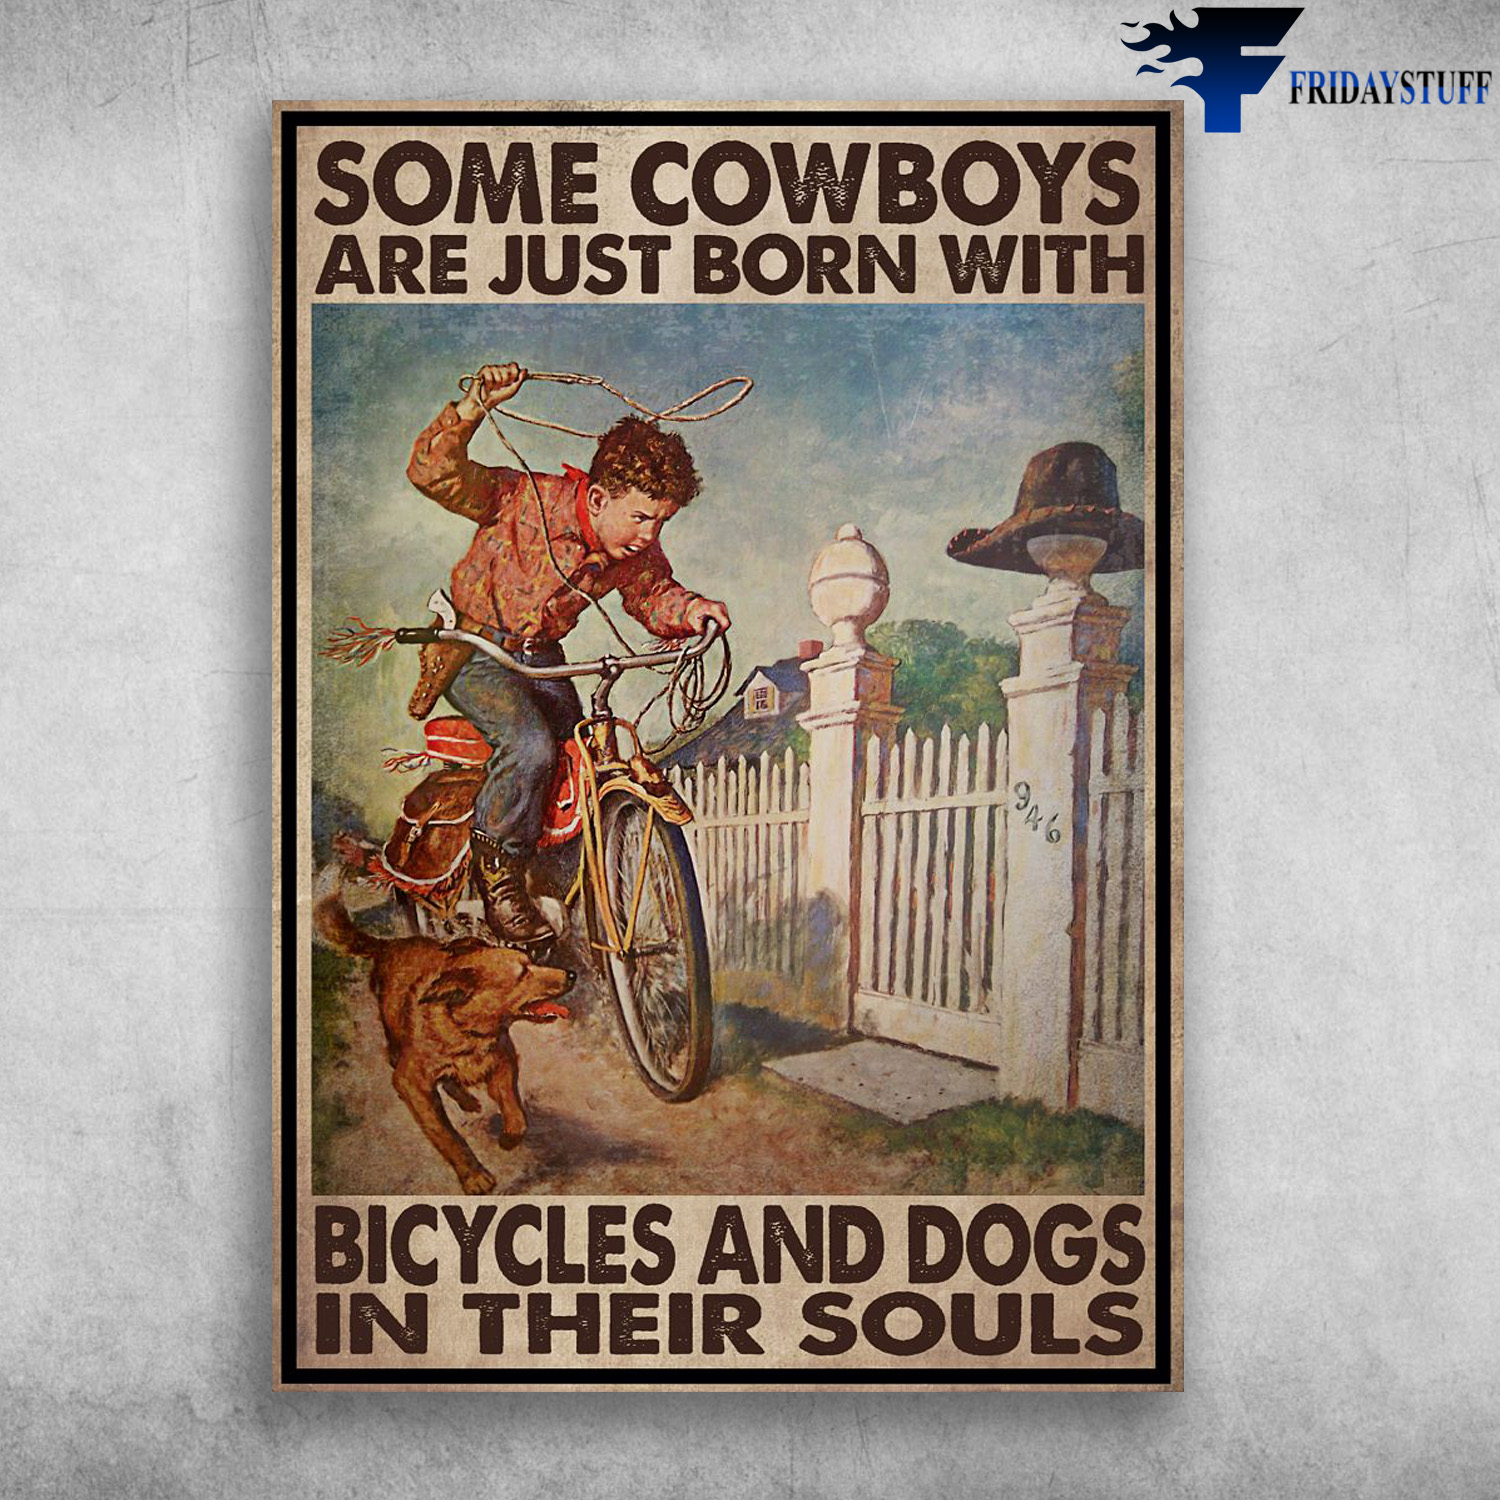 Bicycle Cowboy, Bicycle And Dog - Some Cowboys Are Just Born With, Bicycles And Dogs, In Their Souls